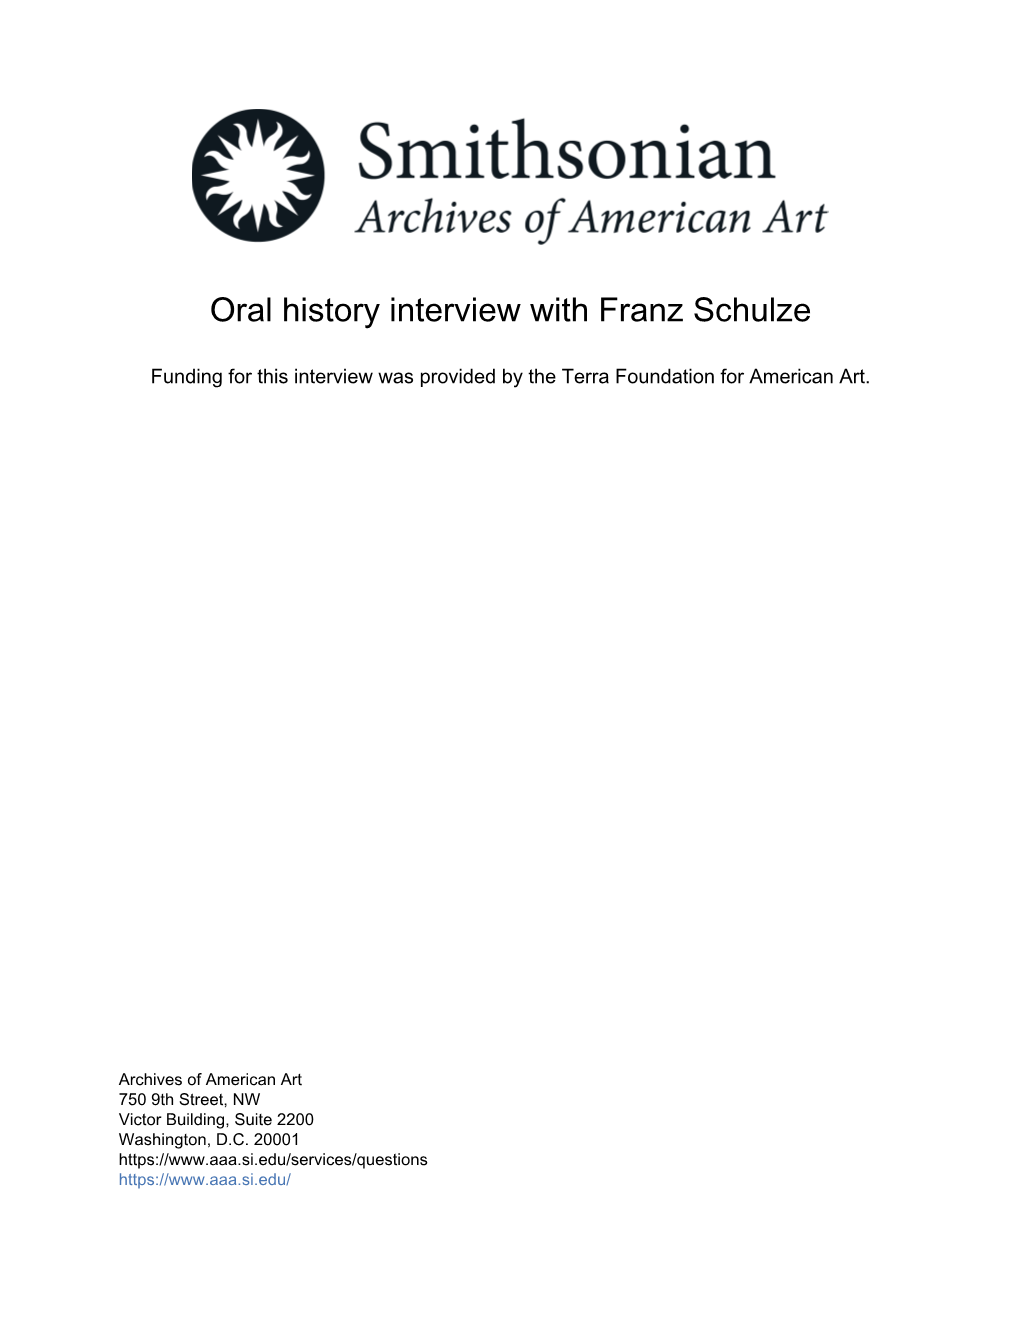 Oral History Interview with Franz Schulze